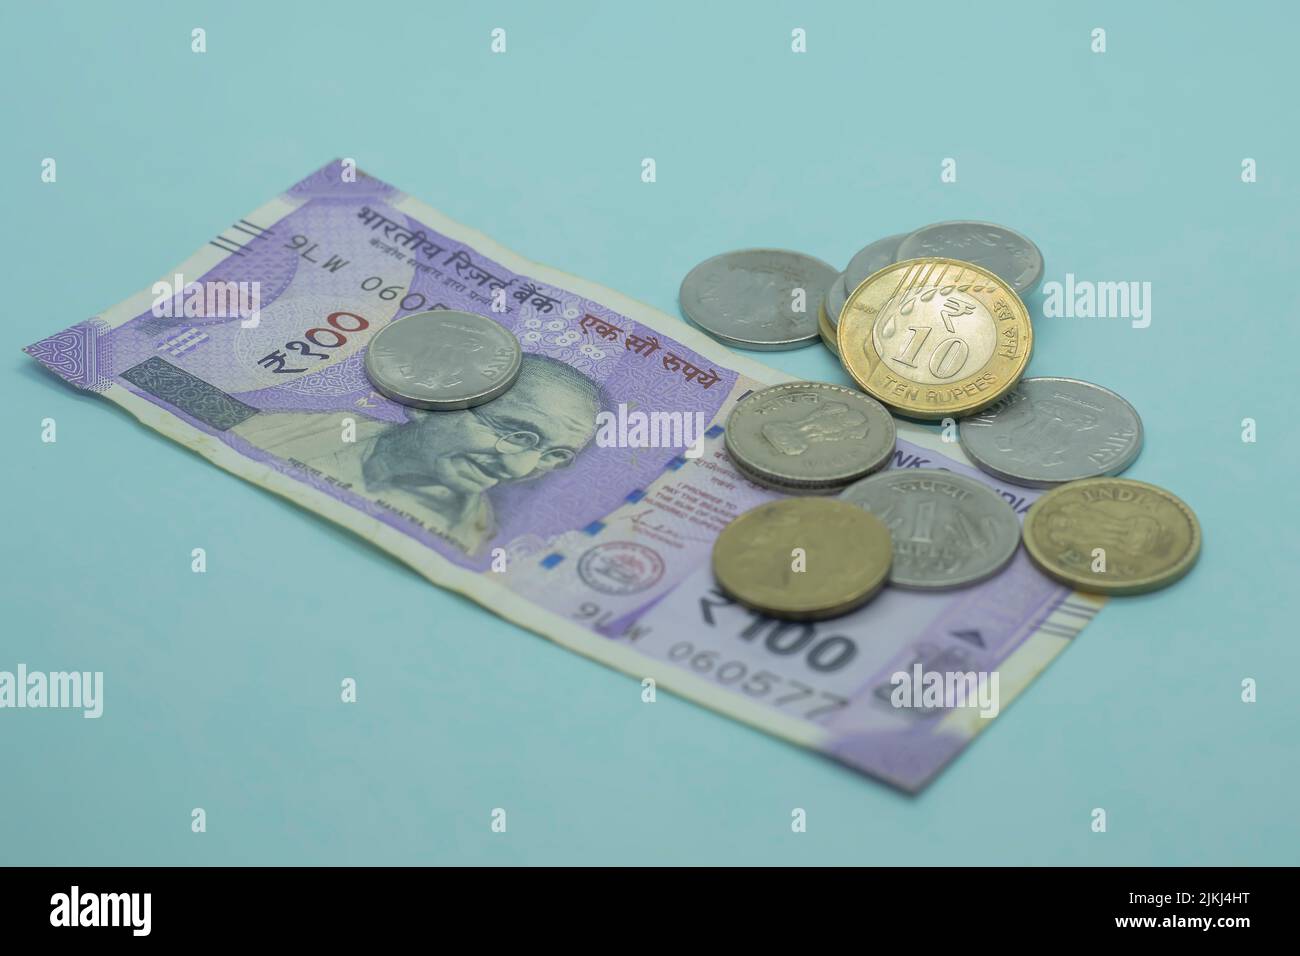 The Indian currency - the 100 rupee note with Indian coins. 1, 5, 10 rupees coins on the blue background Stock Photo